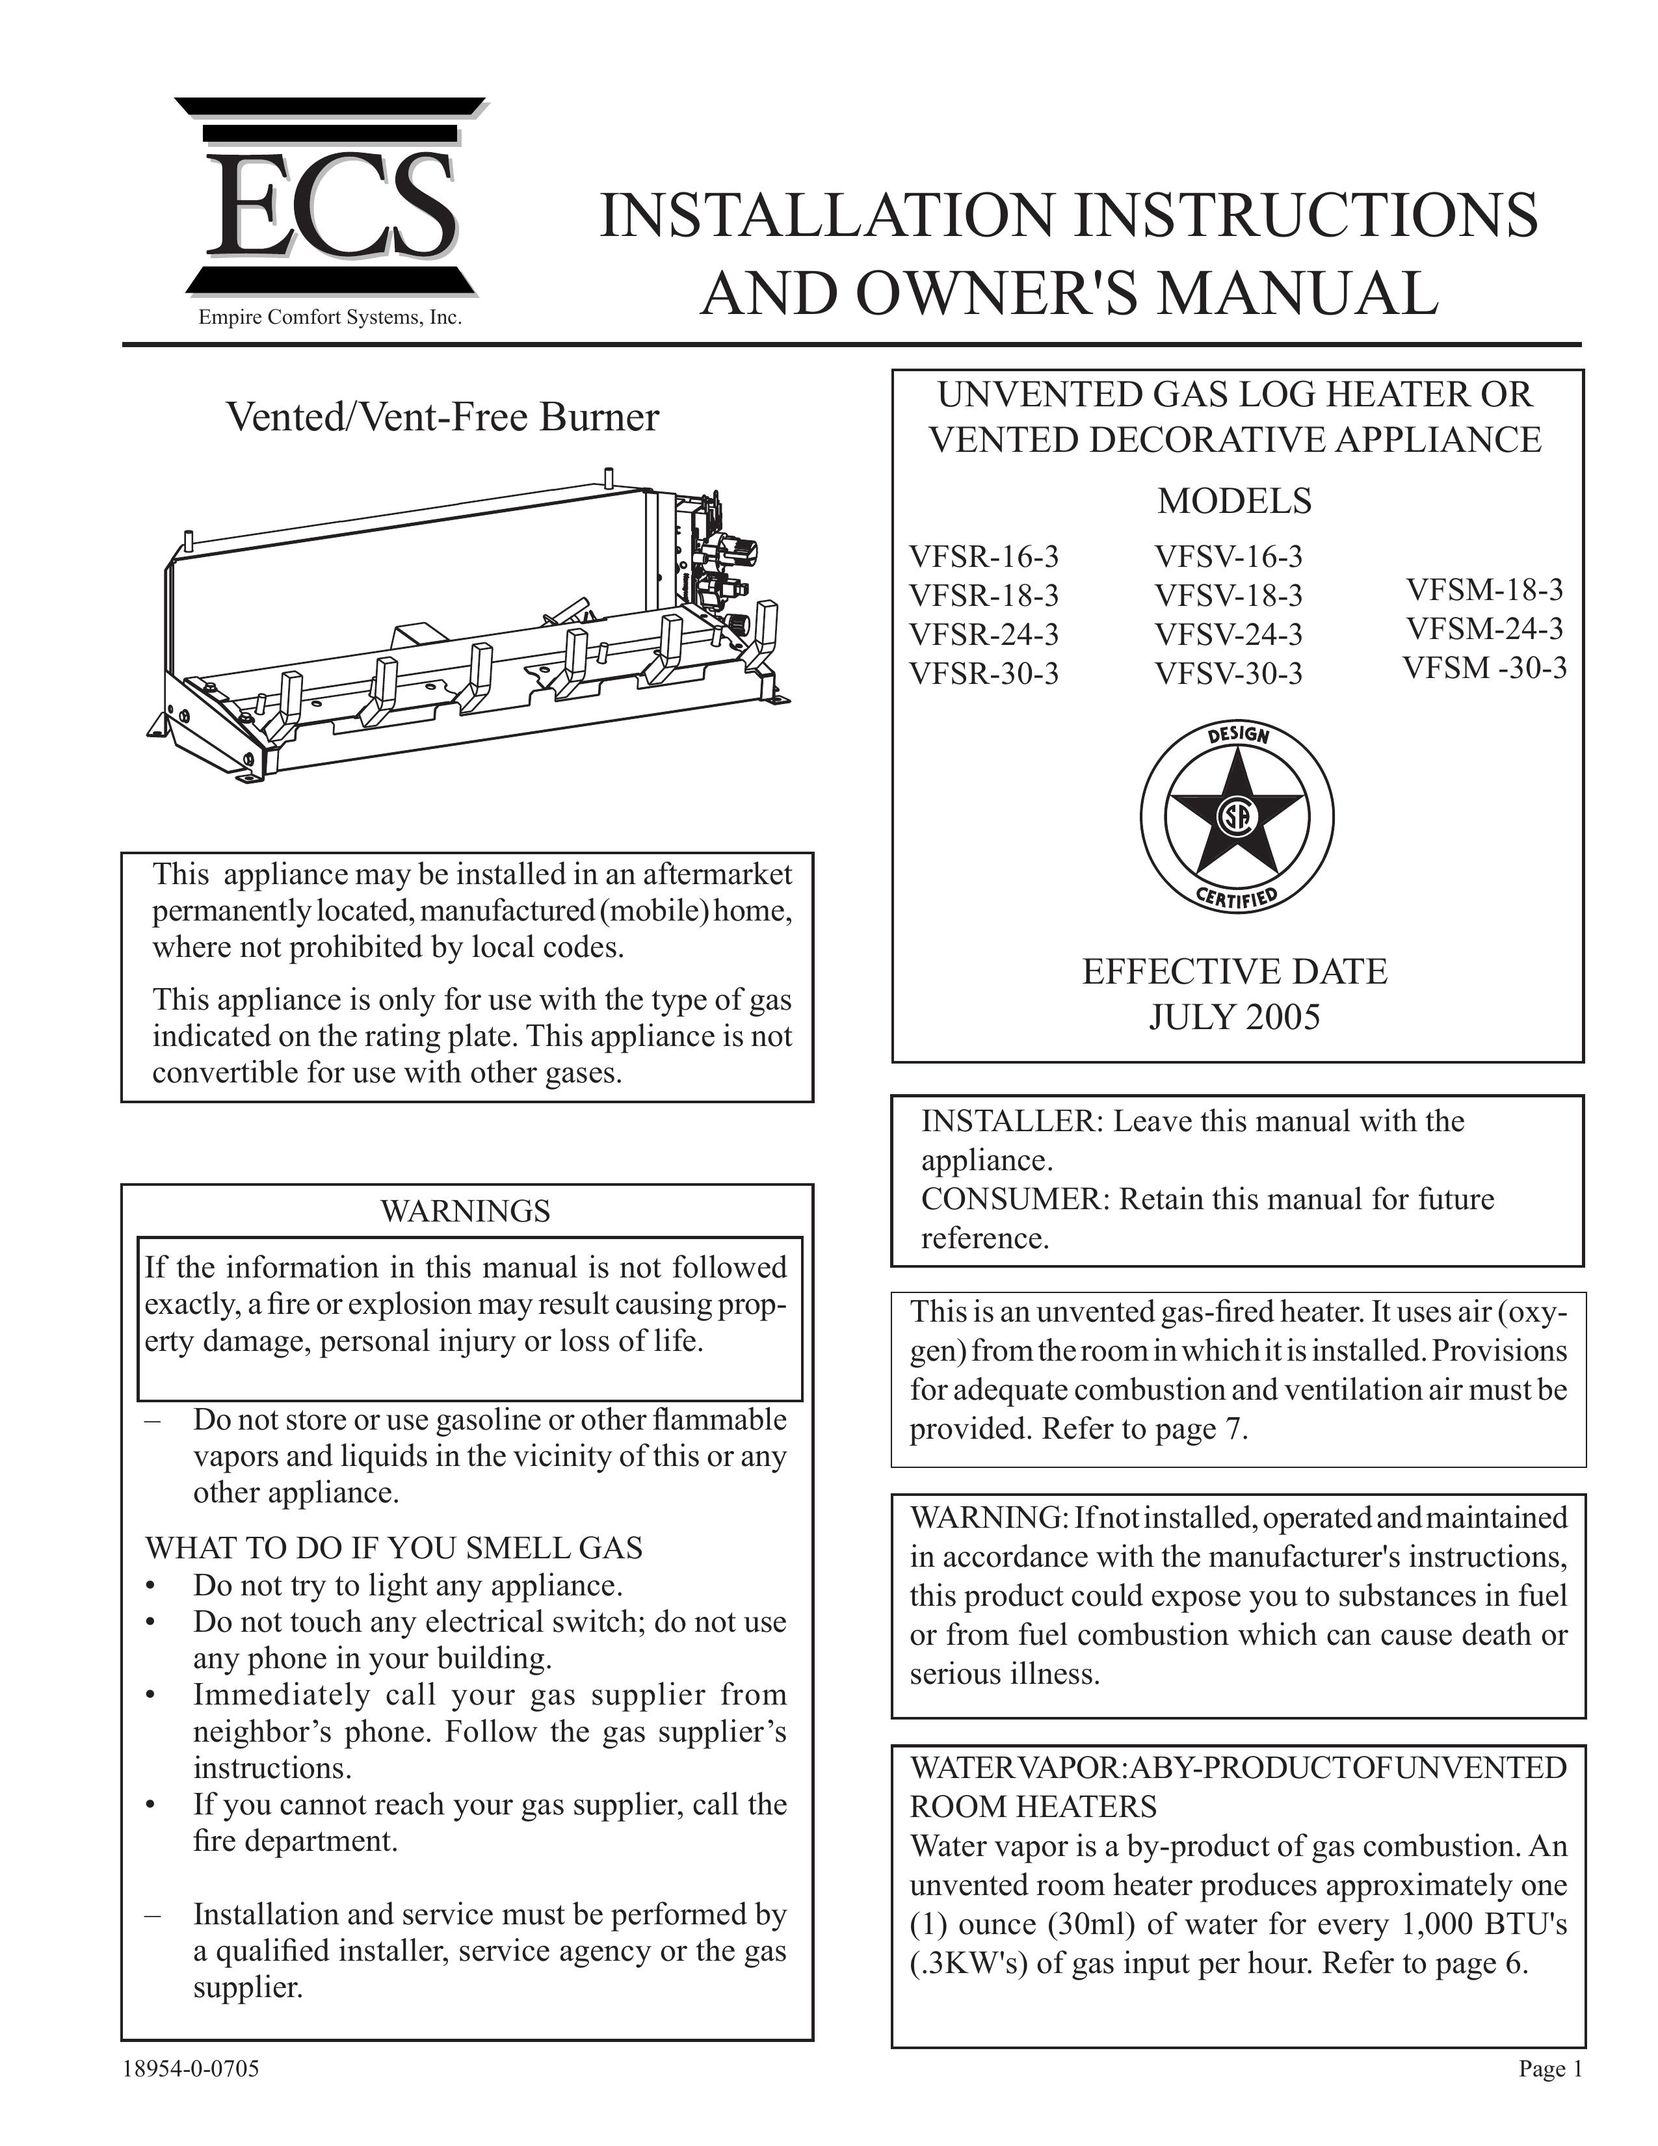 Empire Comfort Systems VFSM-24-3 Electric Heater User Manual